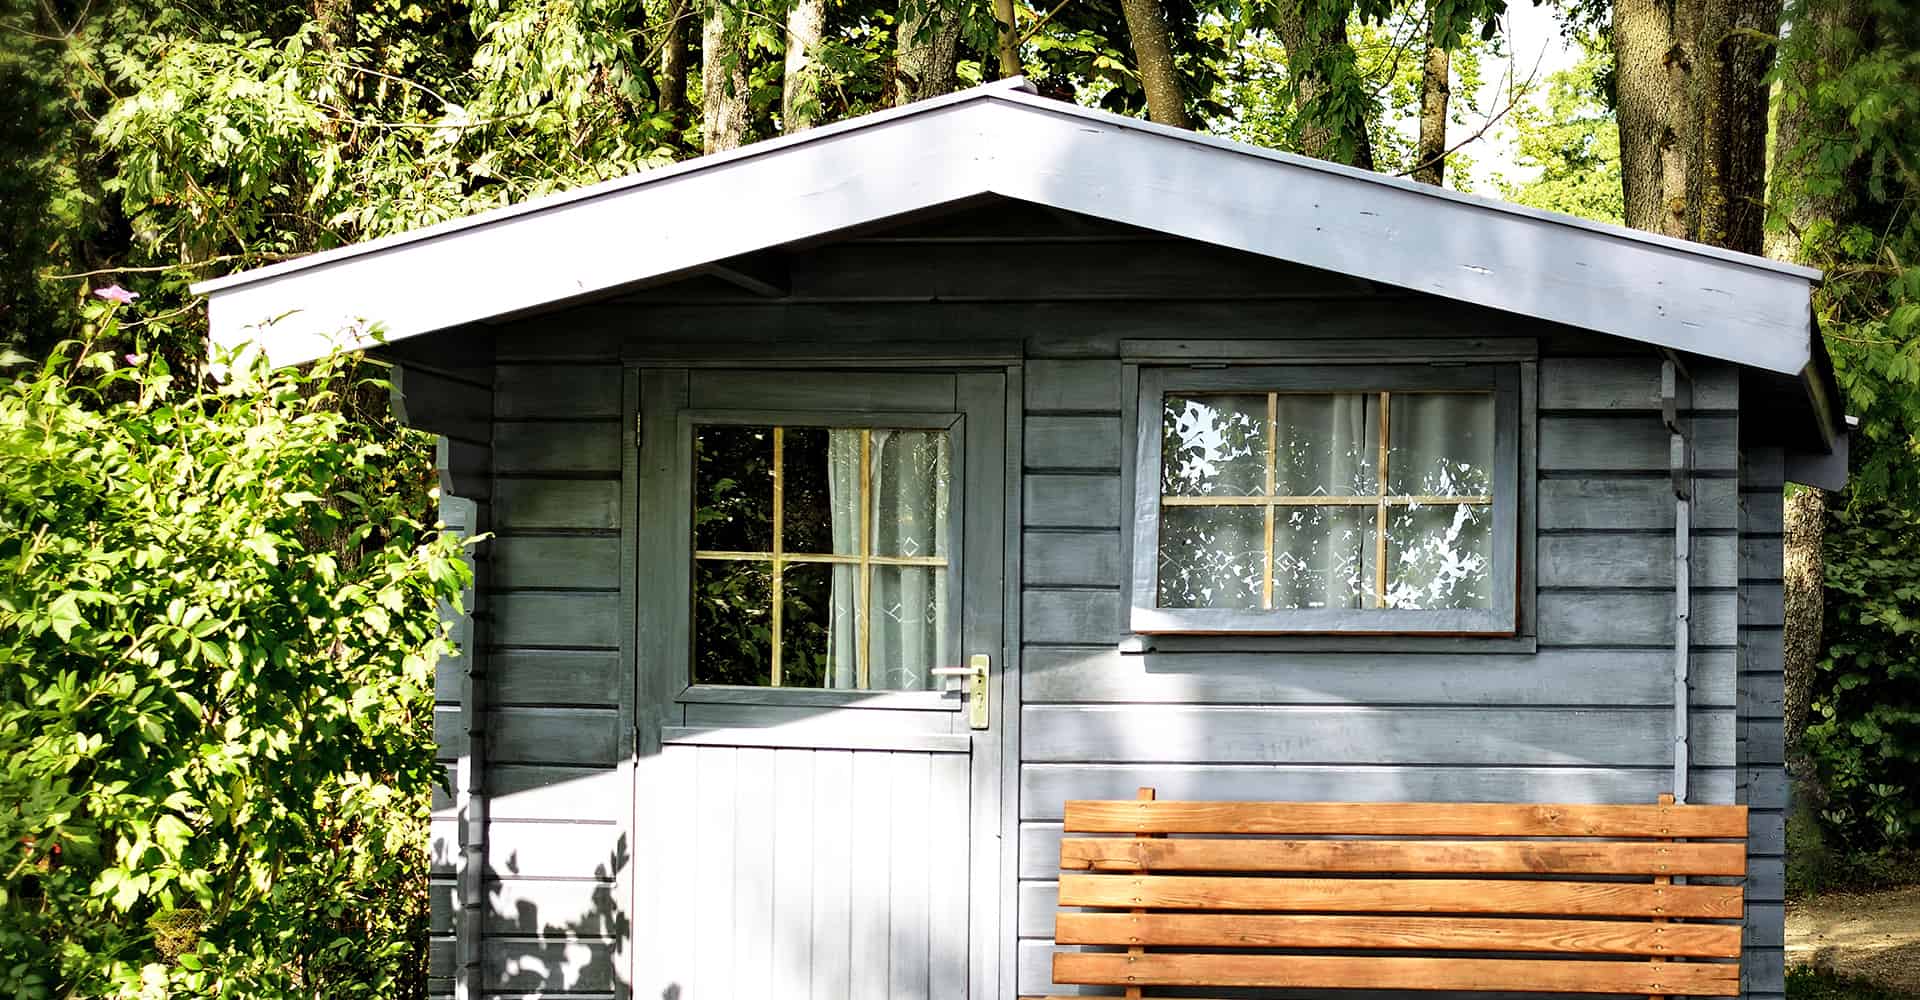 4 Best Shed Paints To Spruce It Up! (2021 Review)